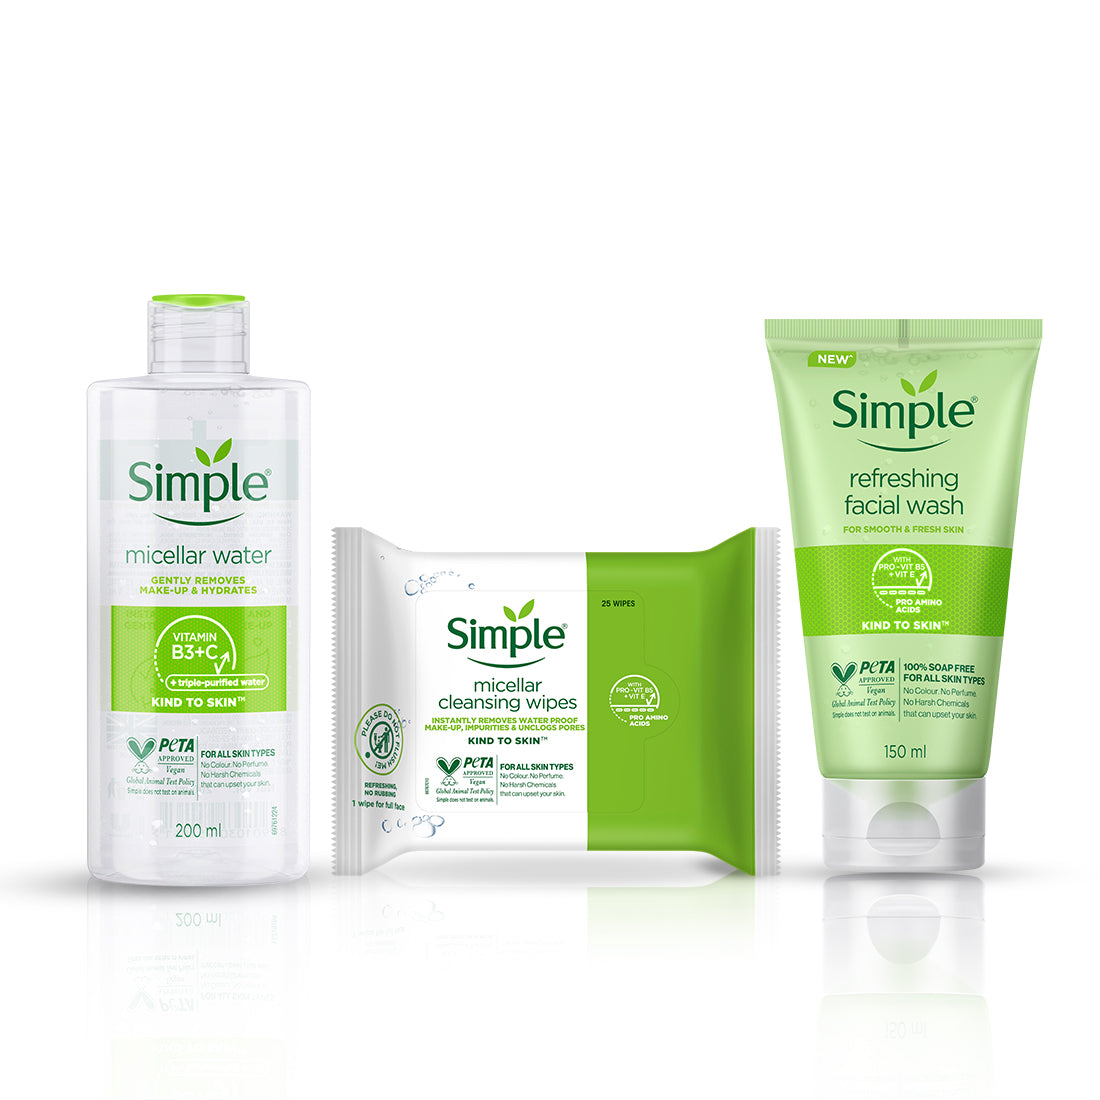 Double Cleansing Combo + micellar cleansing wipes- (200ml + 150ml + 25 wipes) 